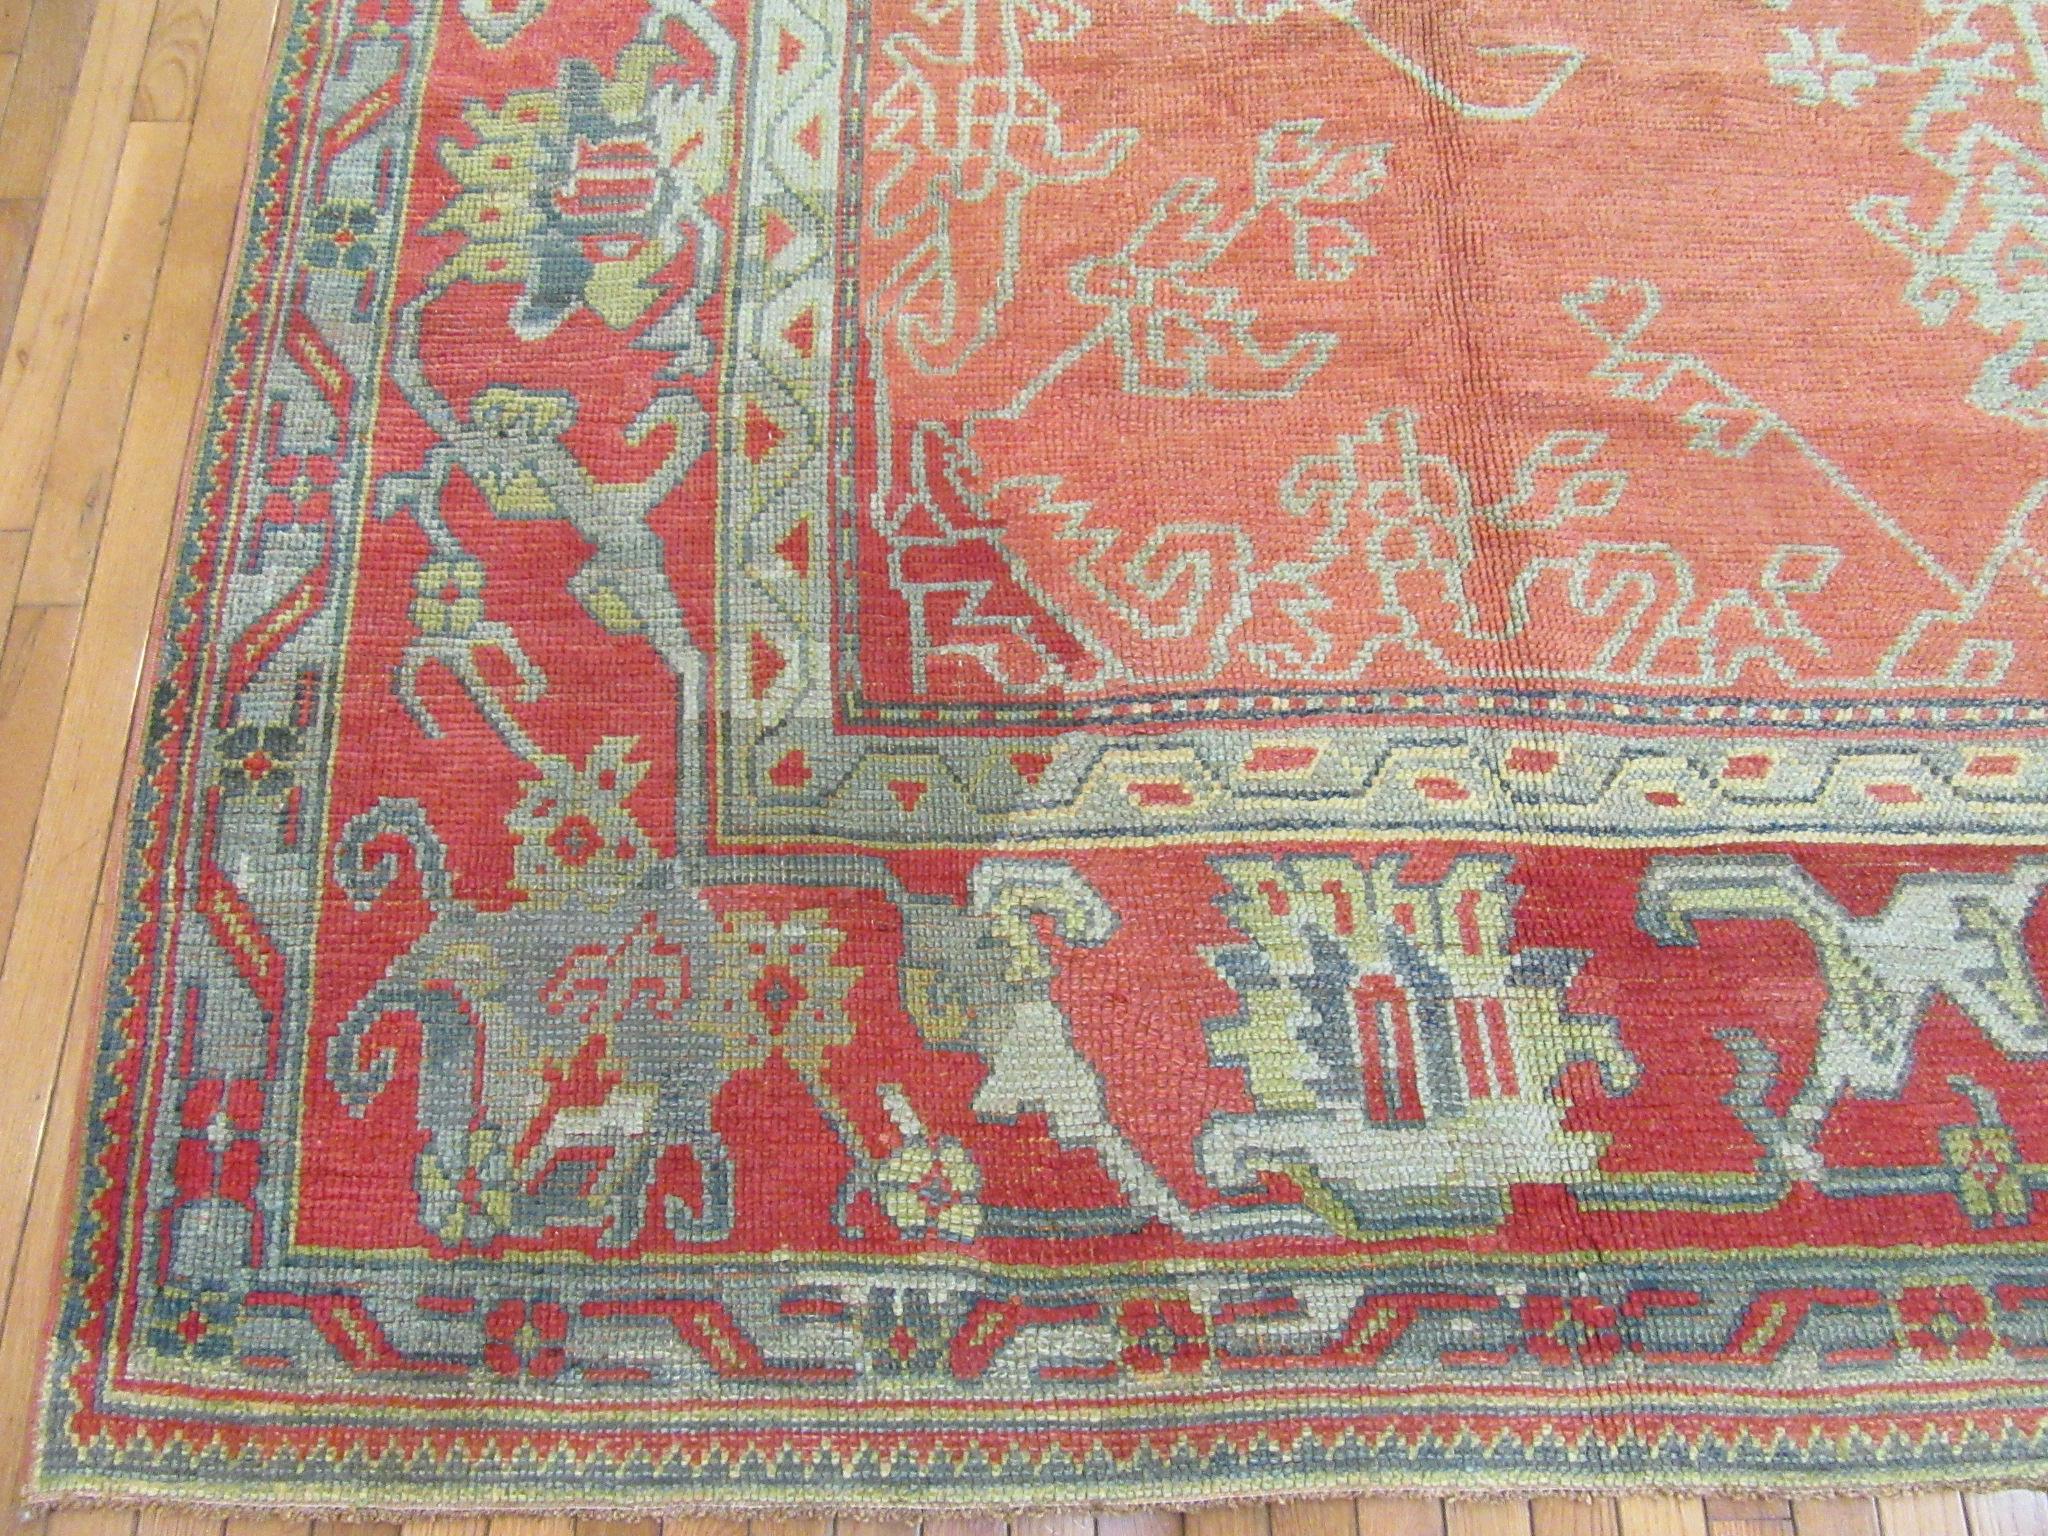 Large Antique Hand-Knotted Wool Coral Red Green Turkish Oushak Rug In Good Condition For Sale In Atlanta, GA